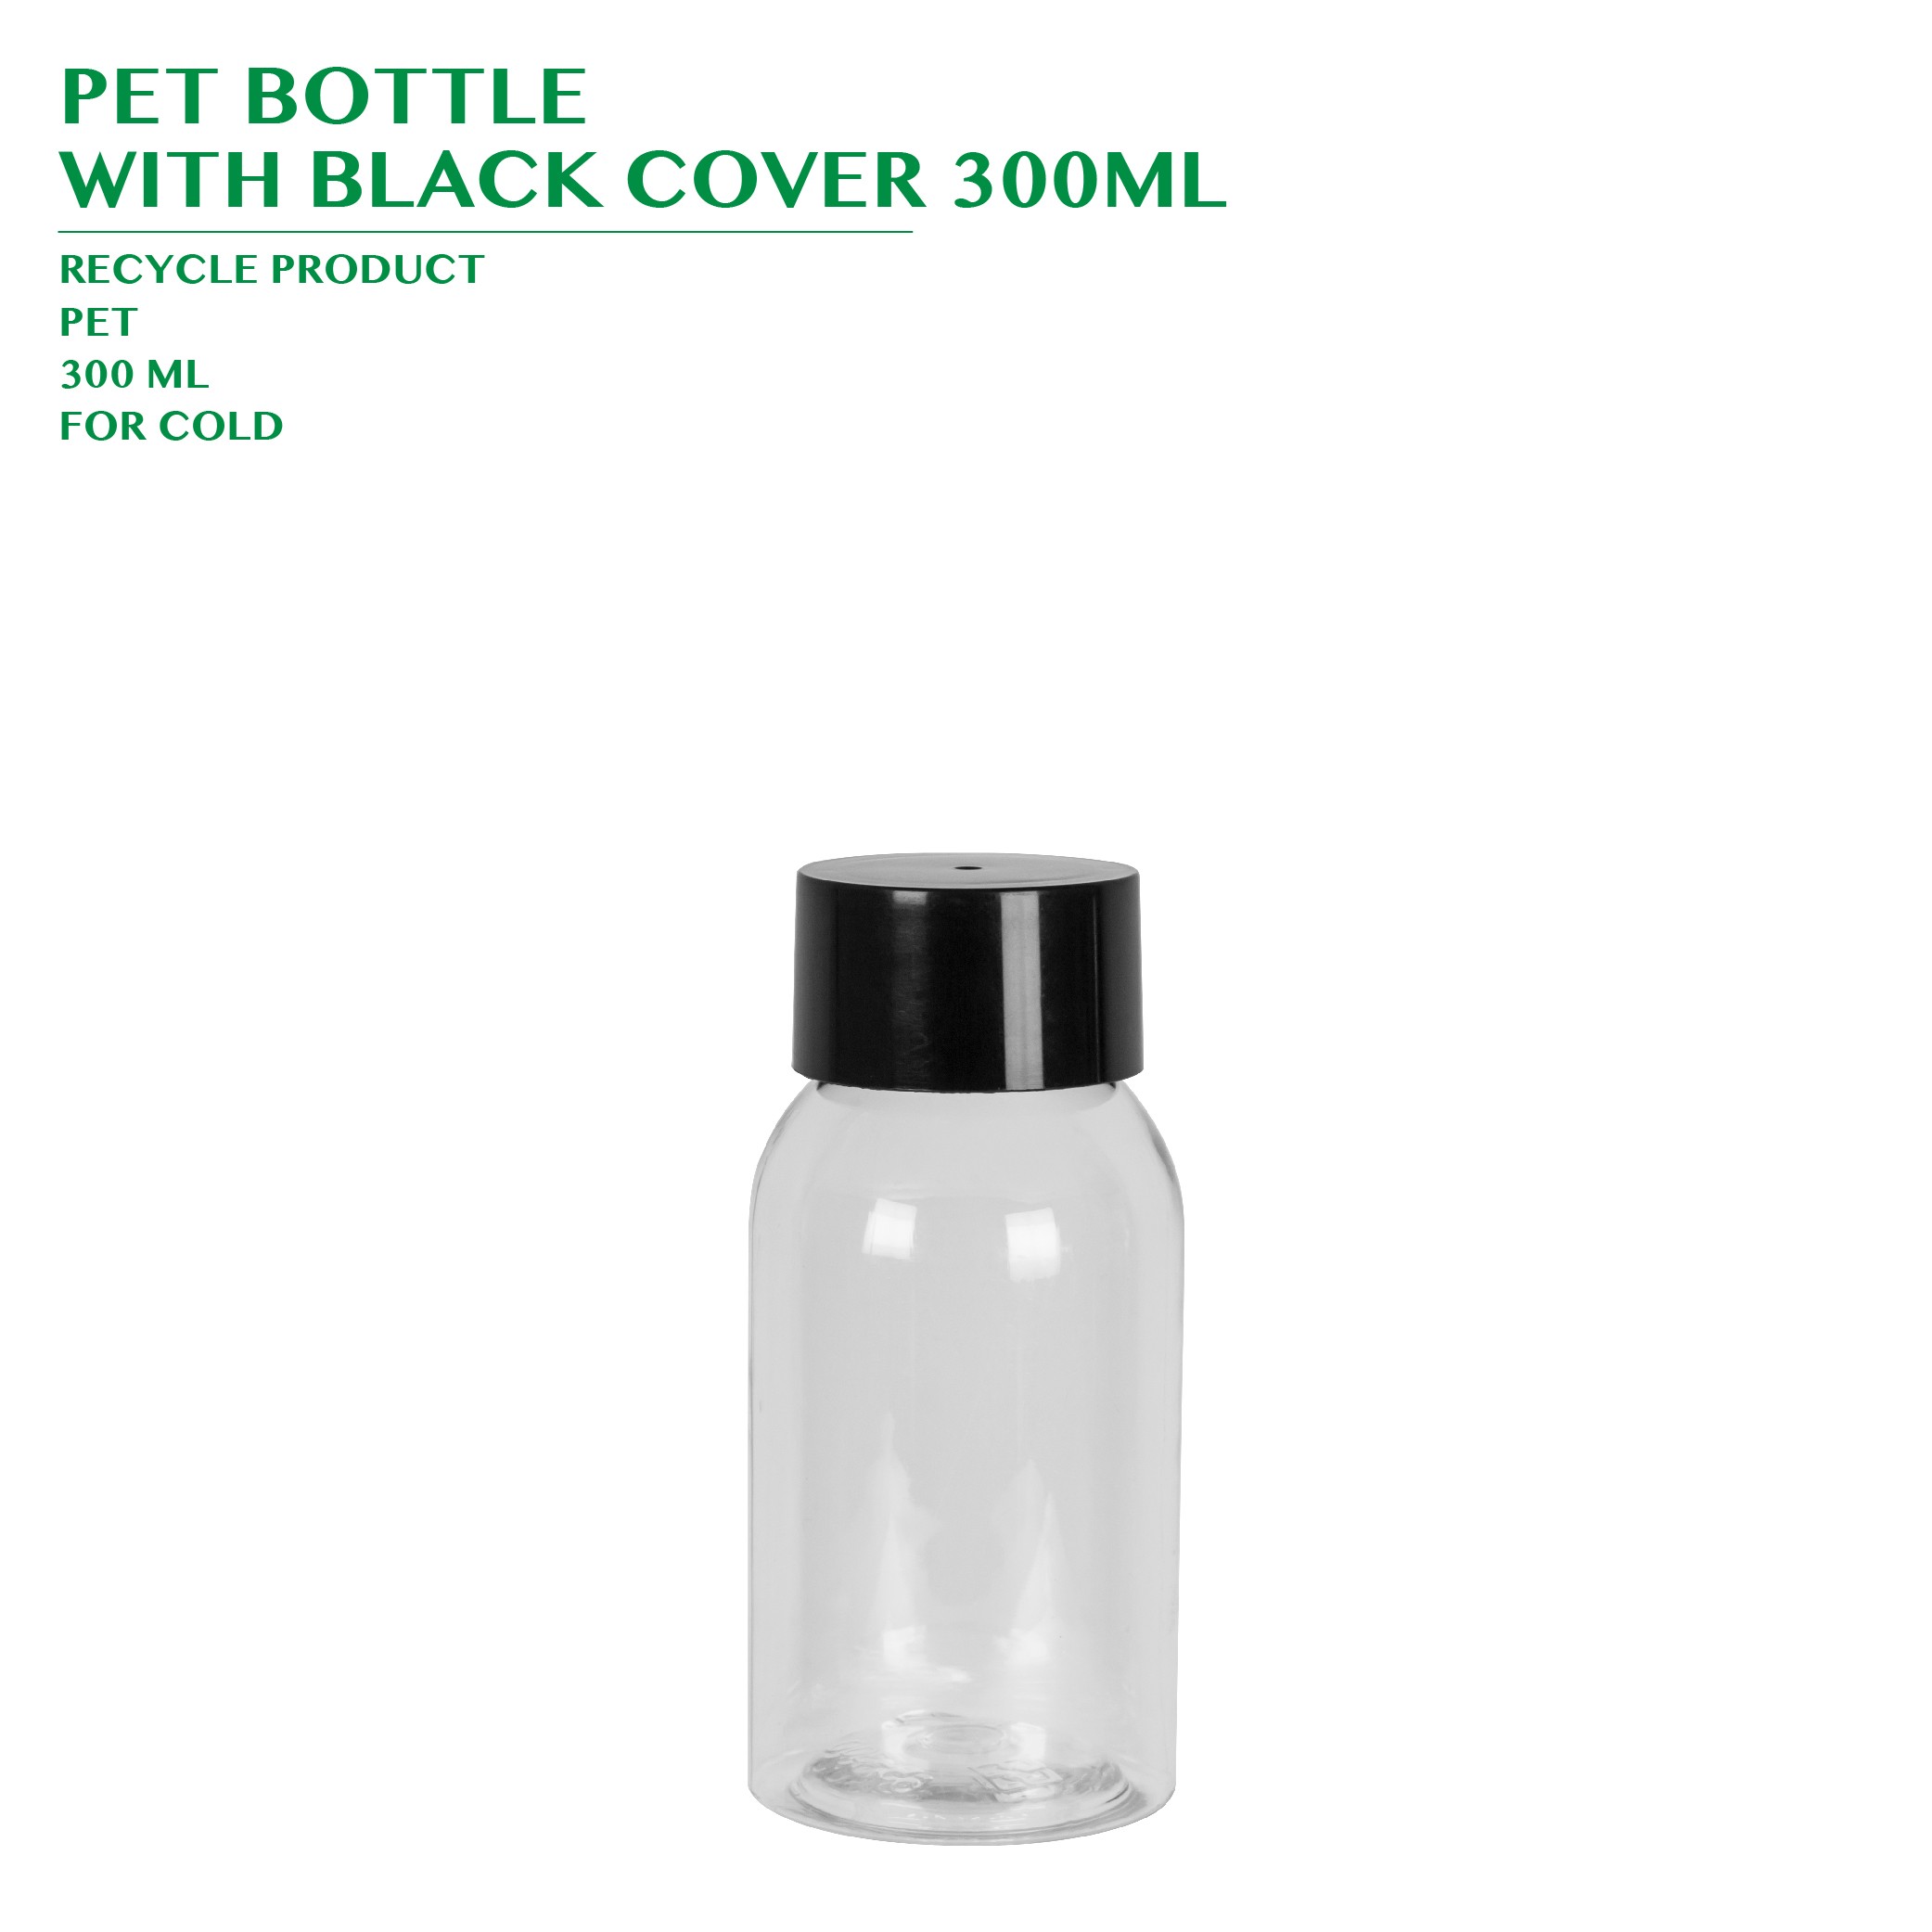 PRE-ORDER PET BOTTLE  WITH BLACK COVER 300ML